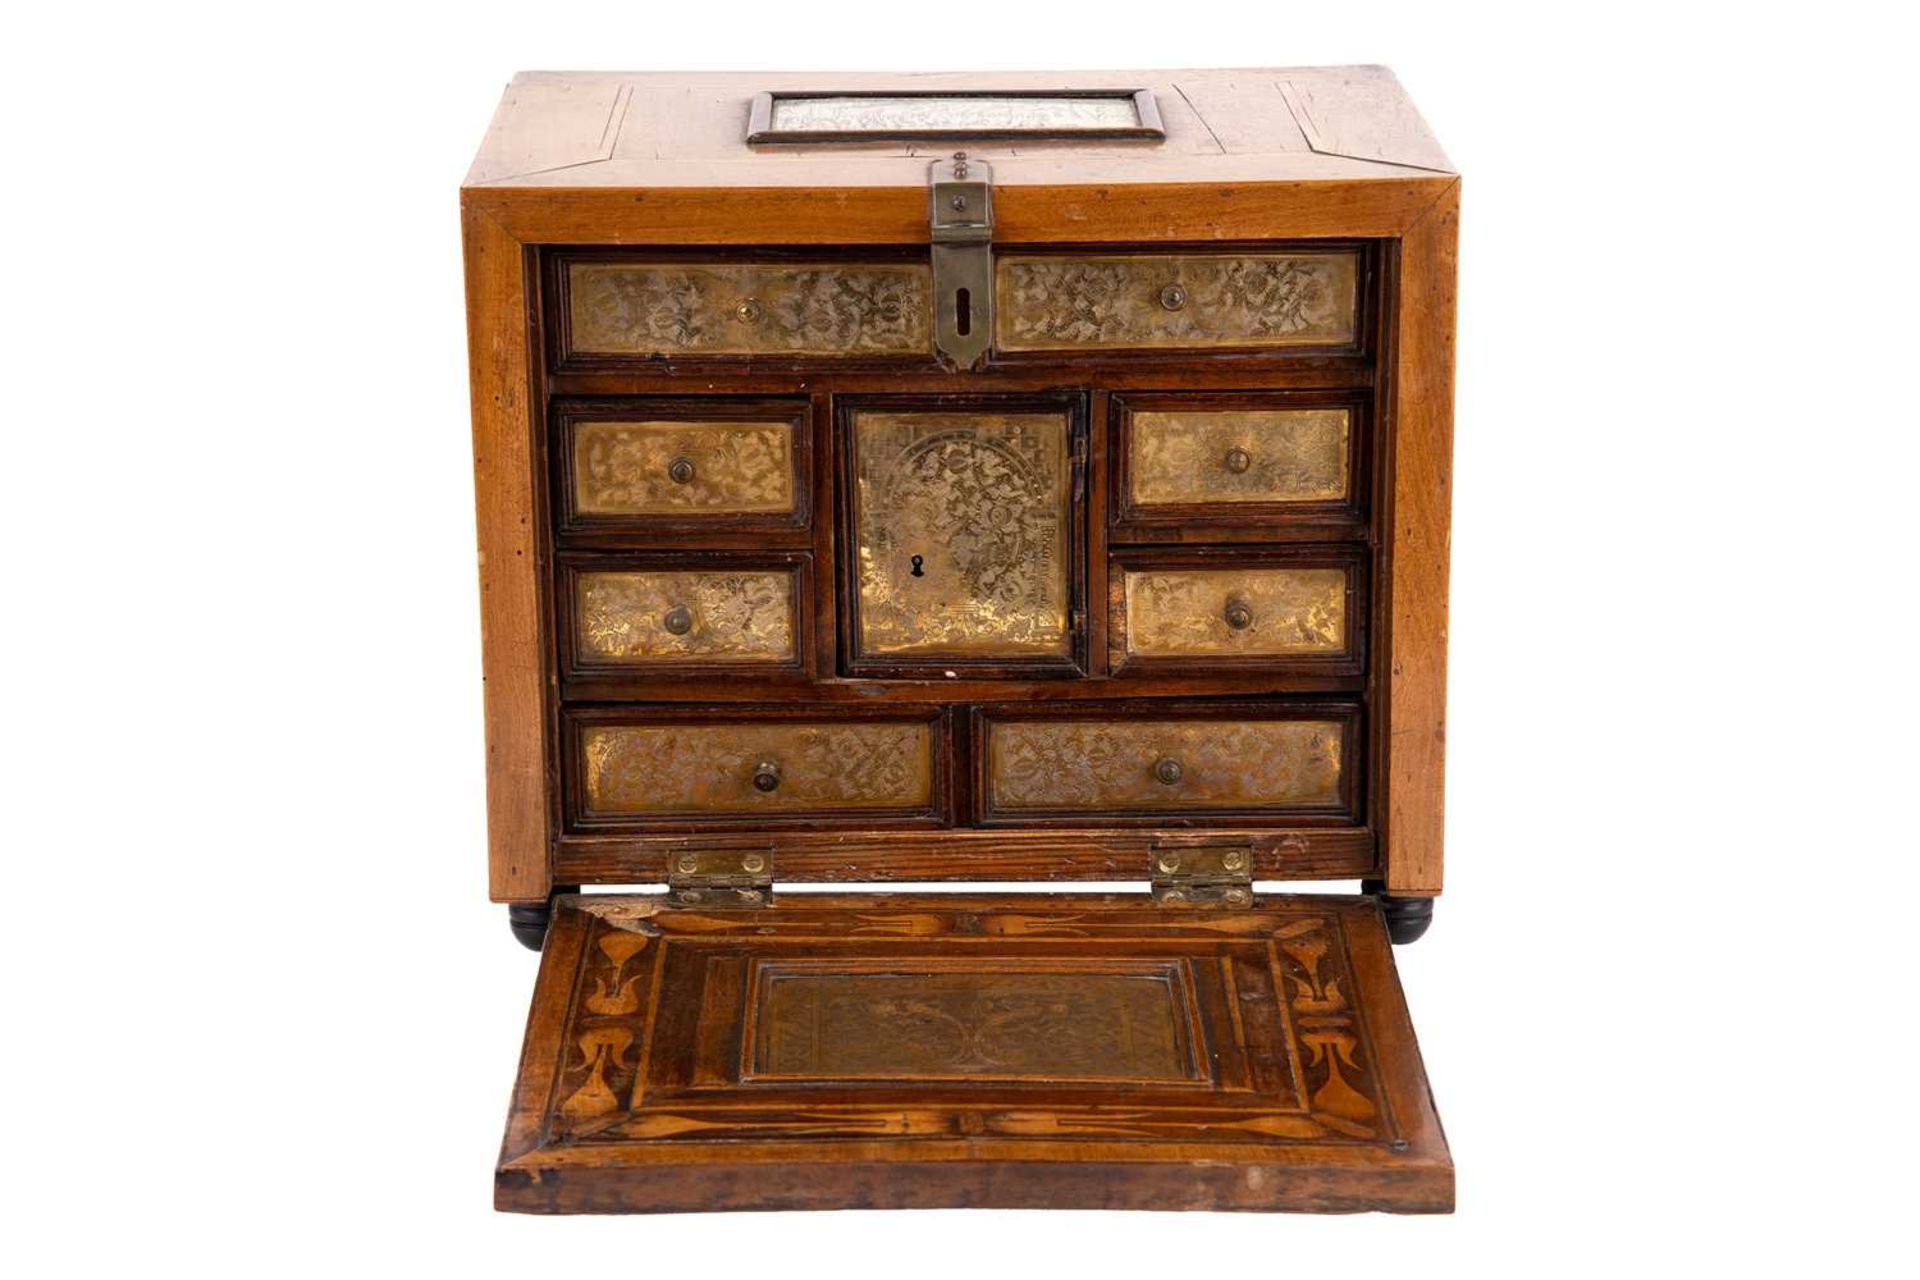 An early to mid 17th century South German Augsburg-type walnut table cabinet, the exterior with simp - Image 2 of 15